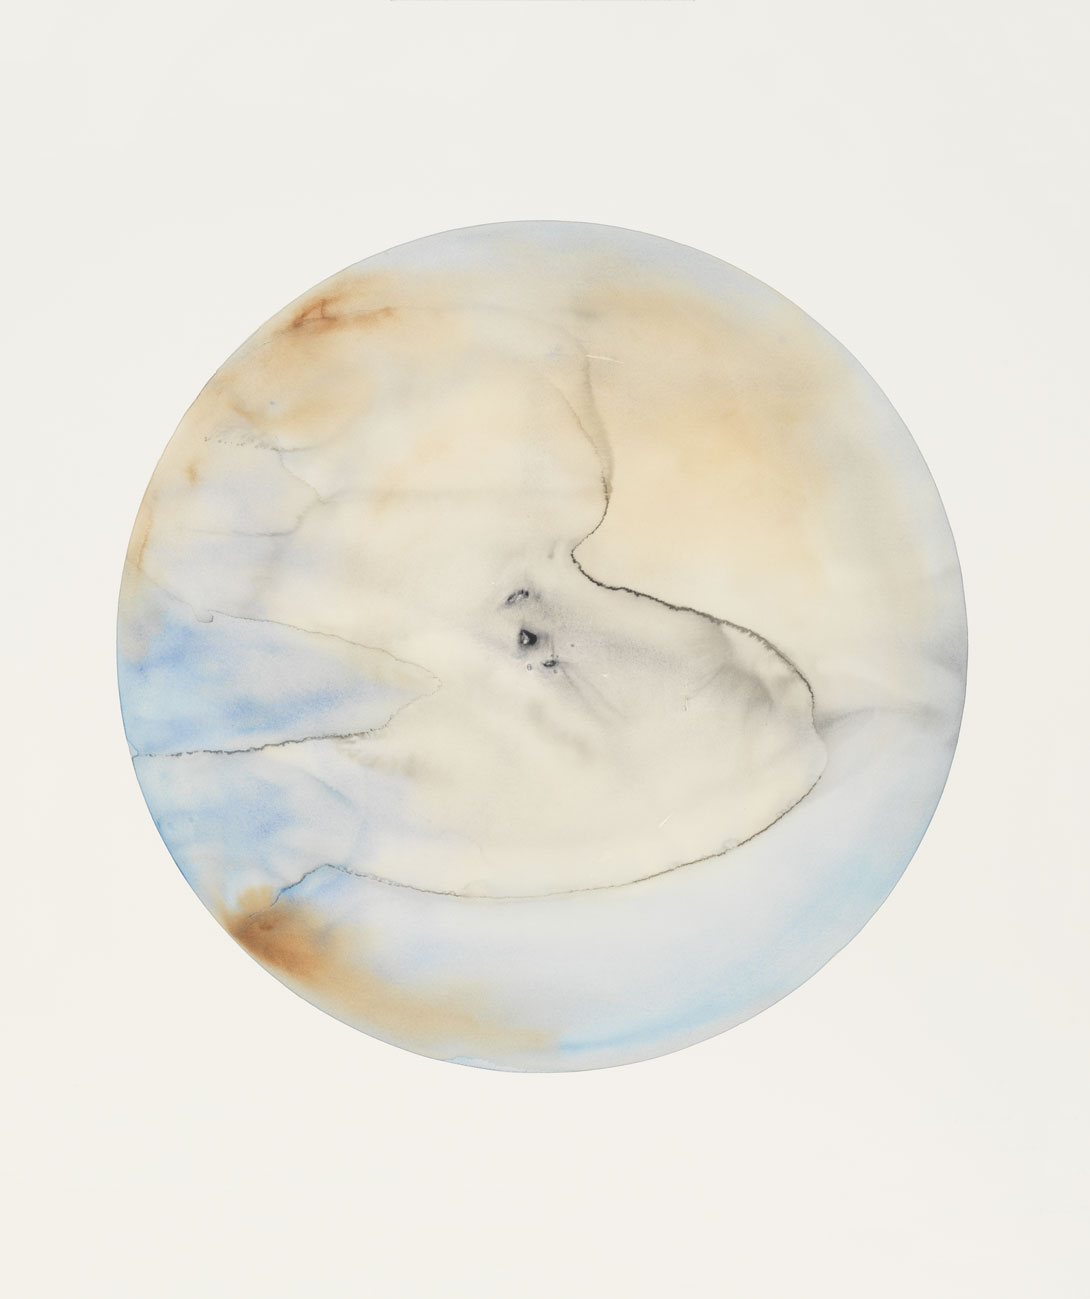 Glacial landscape no. 8, 2018, watercolour and pencil on paper, 151 x 151 x 8 cm (59 ½ x 59 ½ x 3 1?8 in). Picture credit: Jens Ziehe 